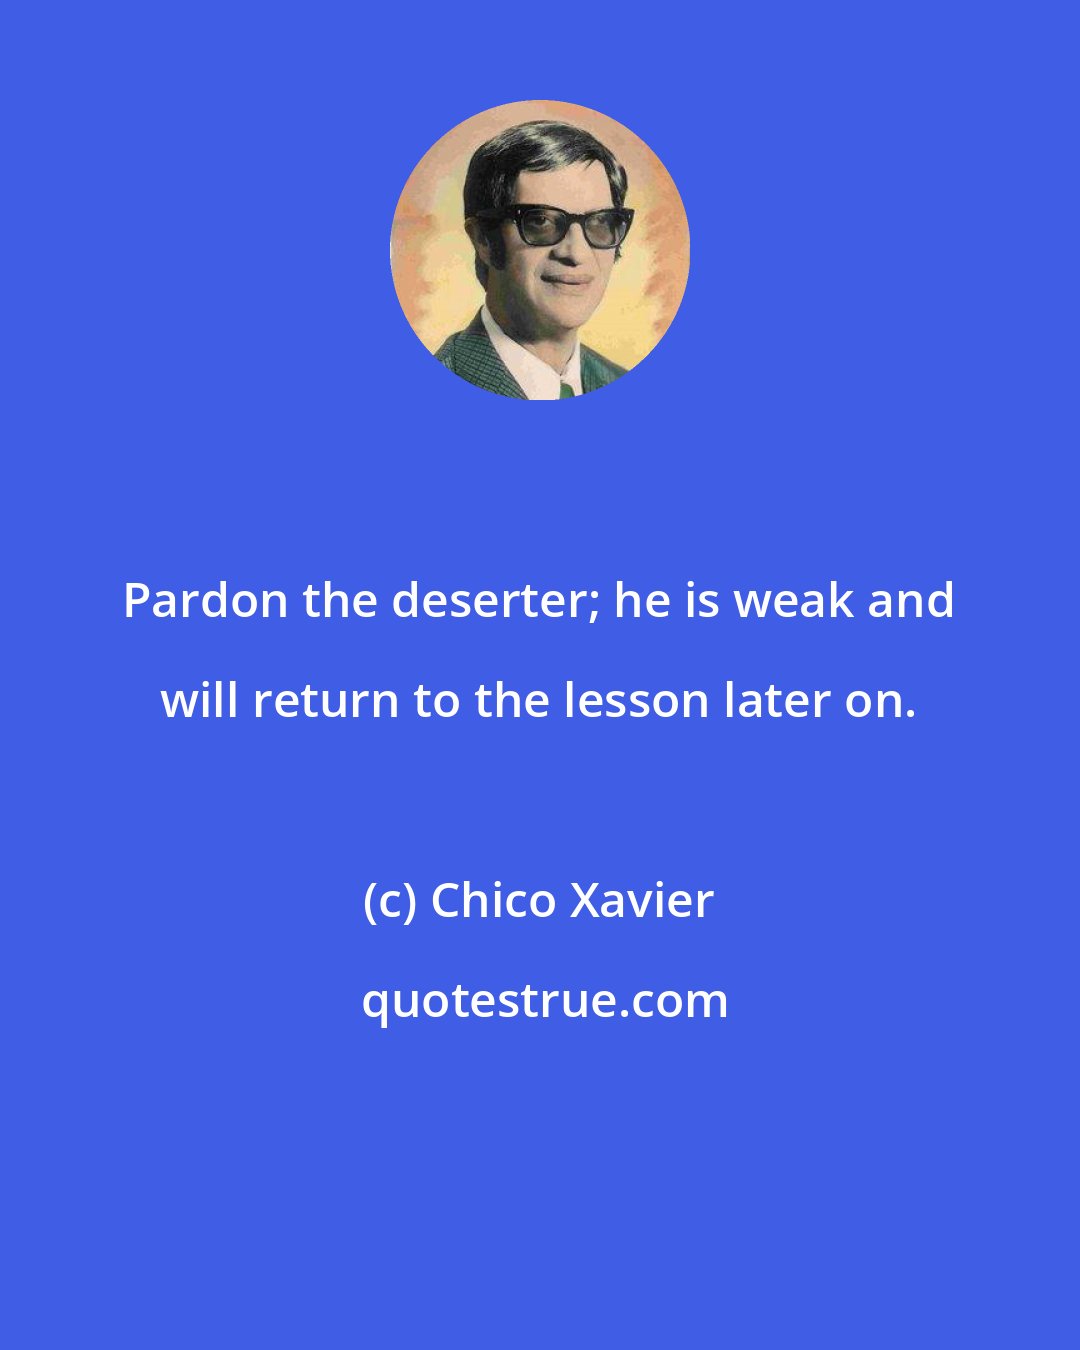 Chico Xavier: Pardon the deserter; he is weak and will return to the lesson later on.